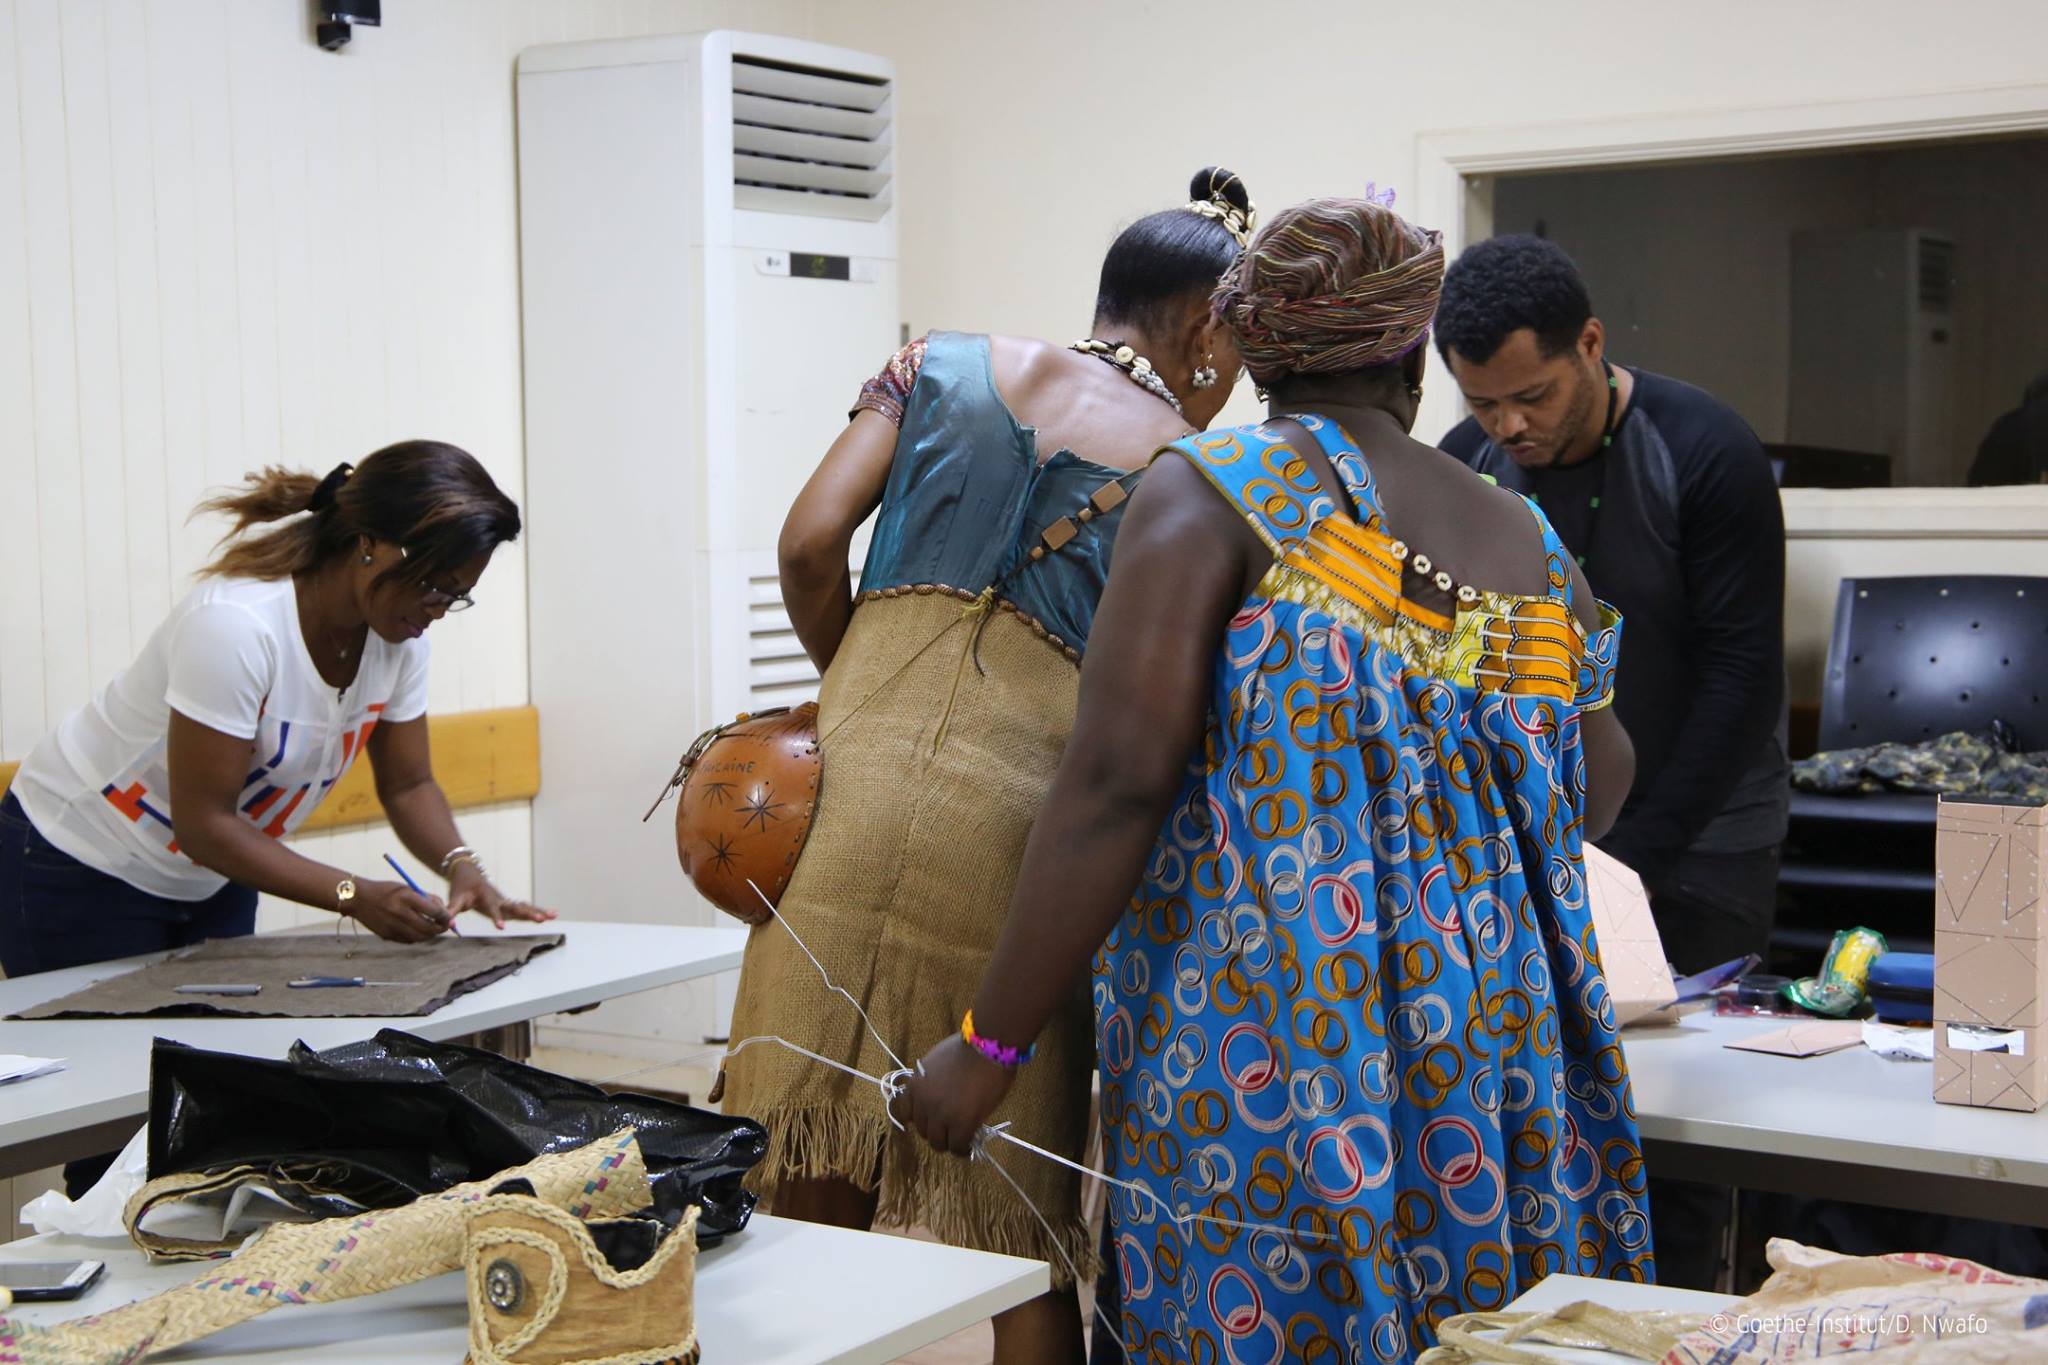 Workshop participants make their costumes using recycled materials.